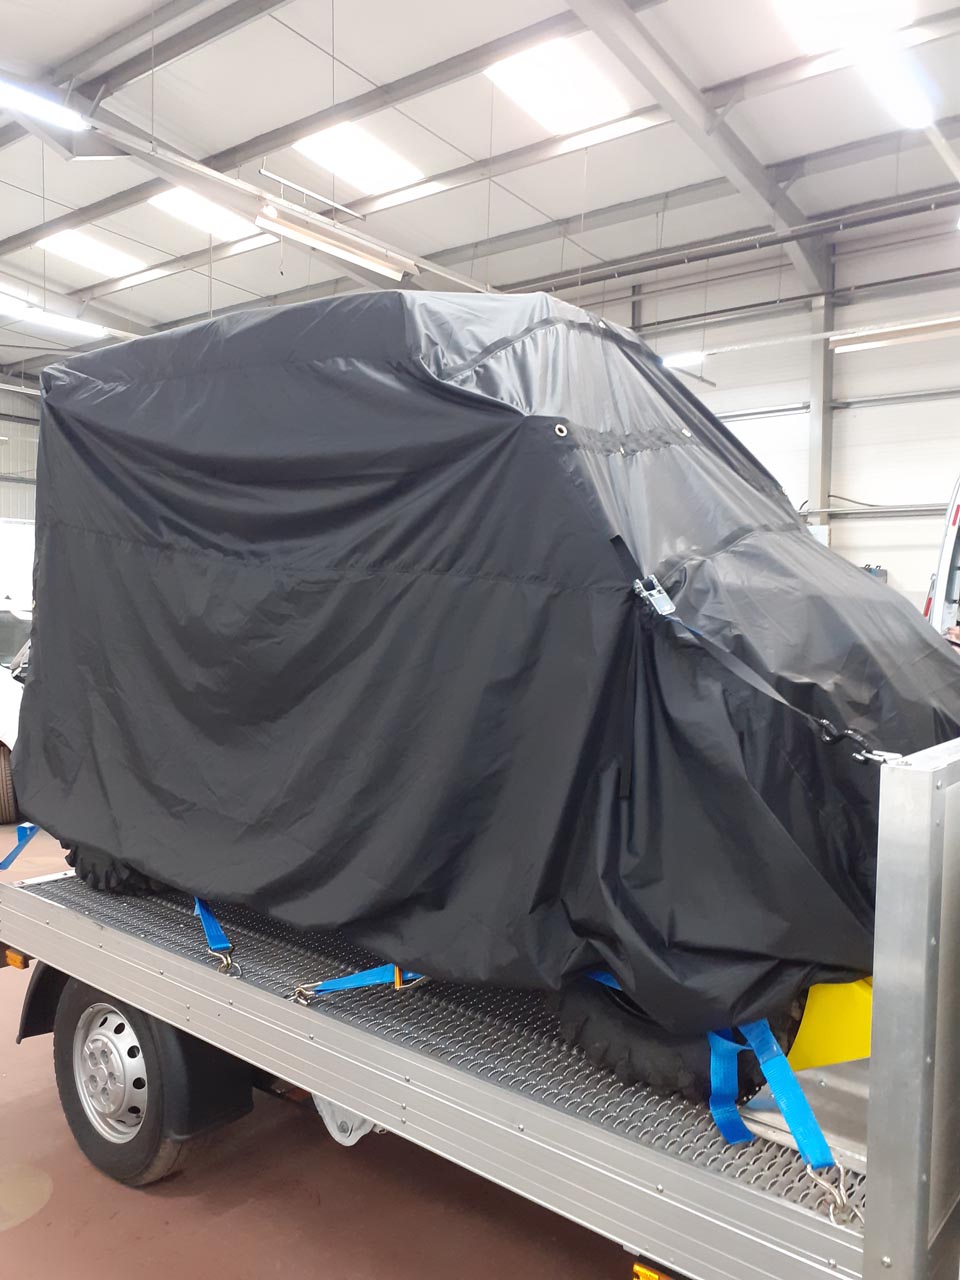 Bespoke load control cover for a car on the back of a truck